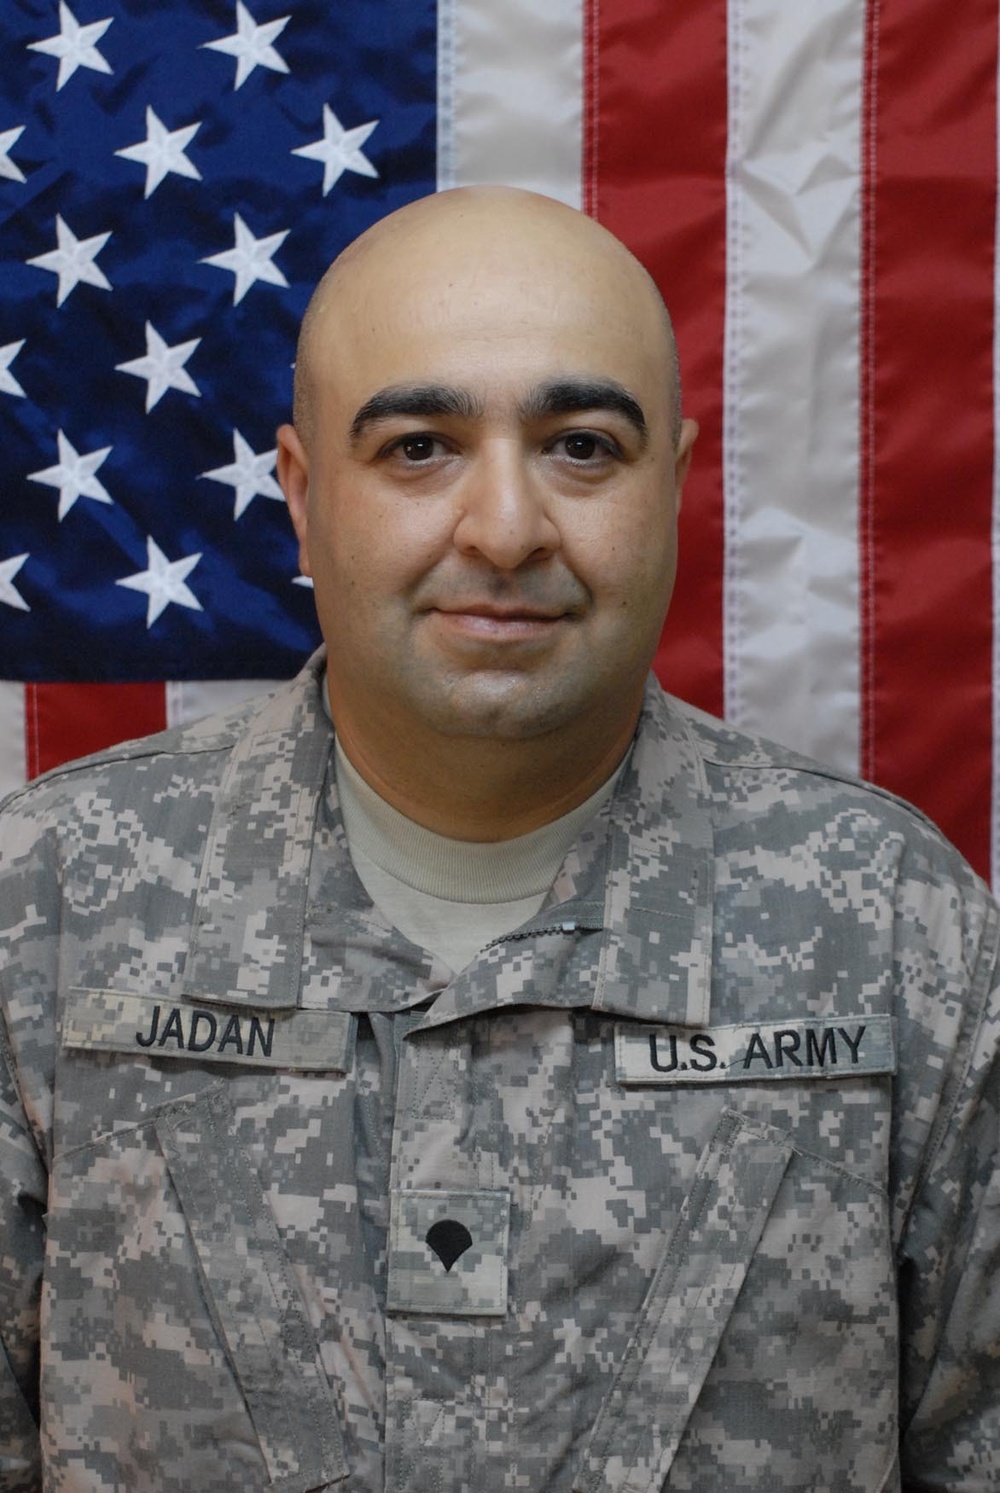 MND-B Soldier serves two countries he calls home: Iraqi-born American Soldier proud to serve both countries